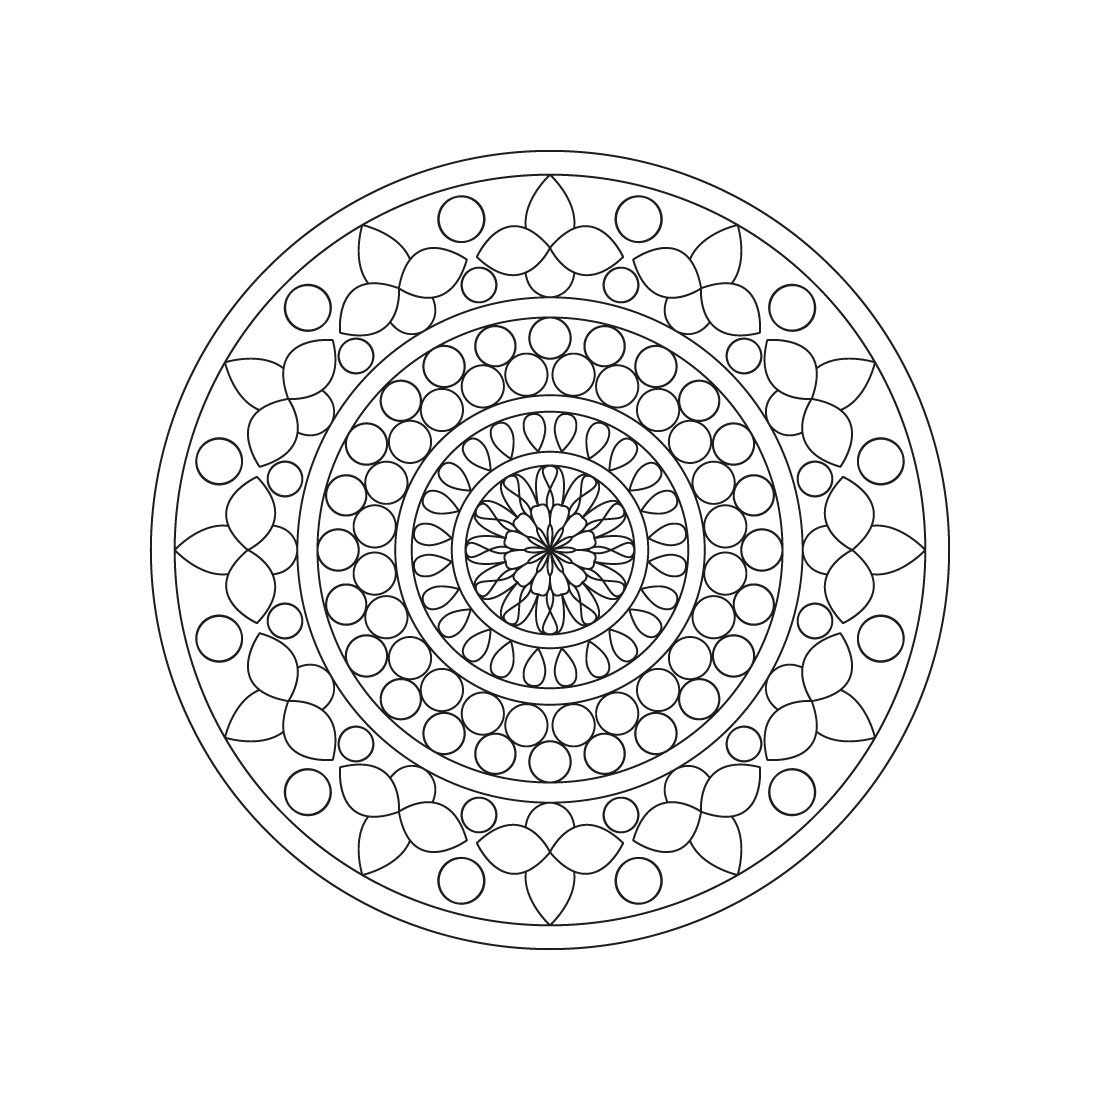 Bundle of 10 Peaceful Patterns Mandala for KDP Colouring Book interior Pages preview image.